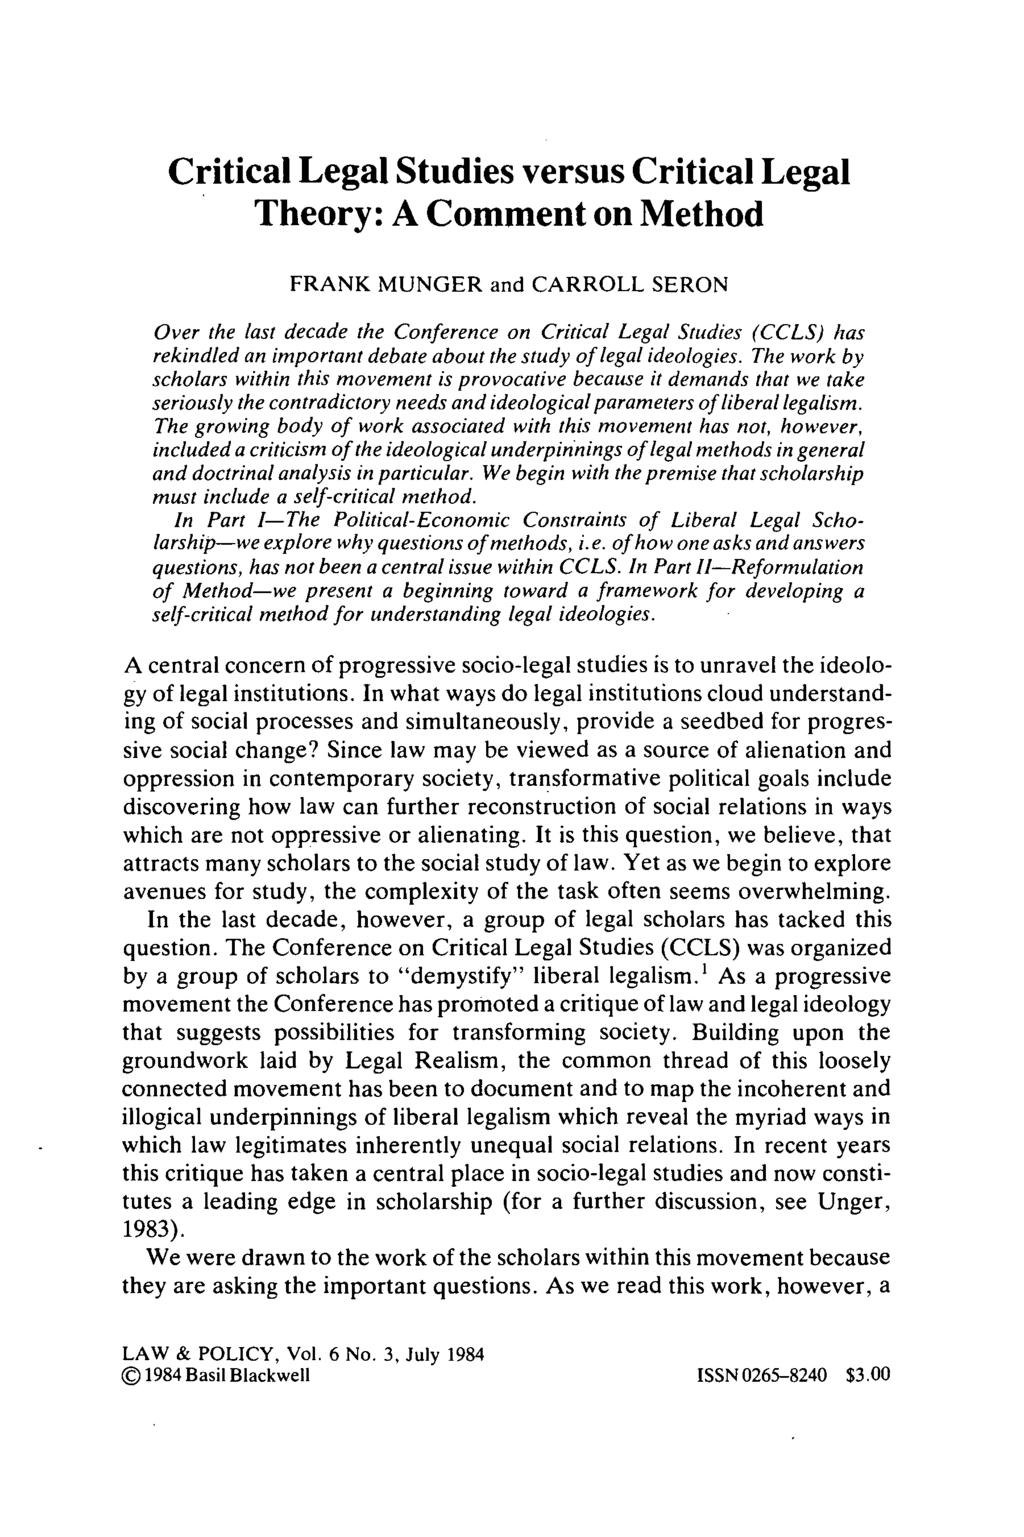 Critical Legal Studies versus Critical Legal Theory: A Comment on Method FRANK MUNGER and CARROLL SERON Over the last decade the Conference on Critical Legal Studies (CCLS) has rekindled an important